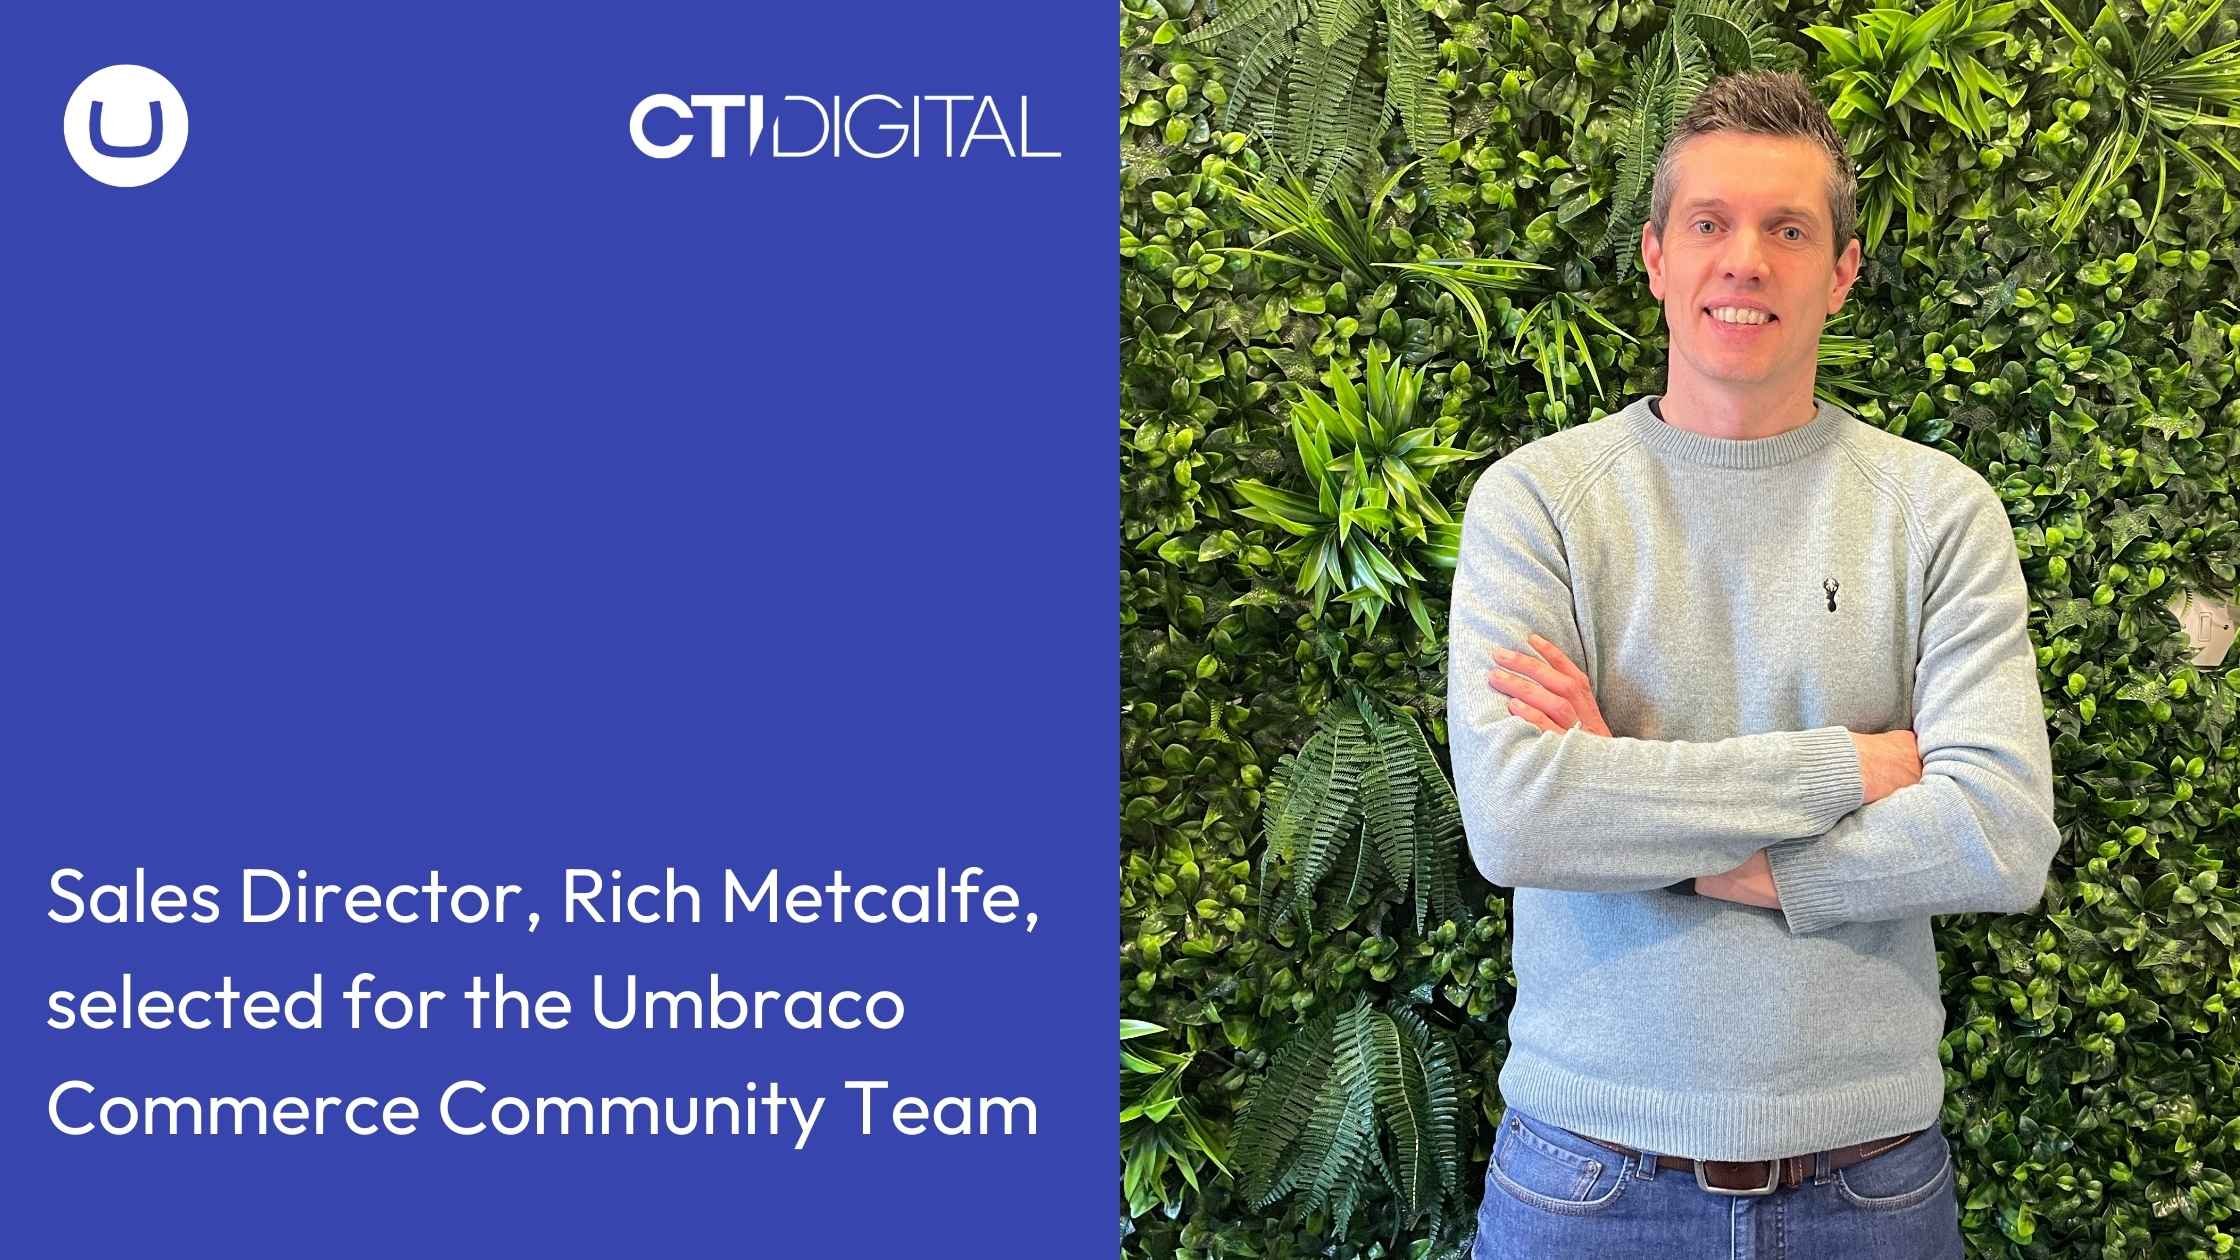 Rich and Umbraco